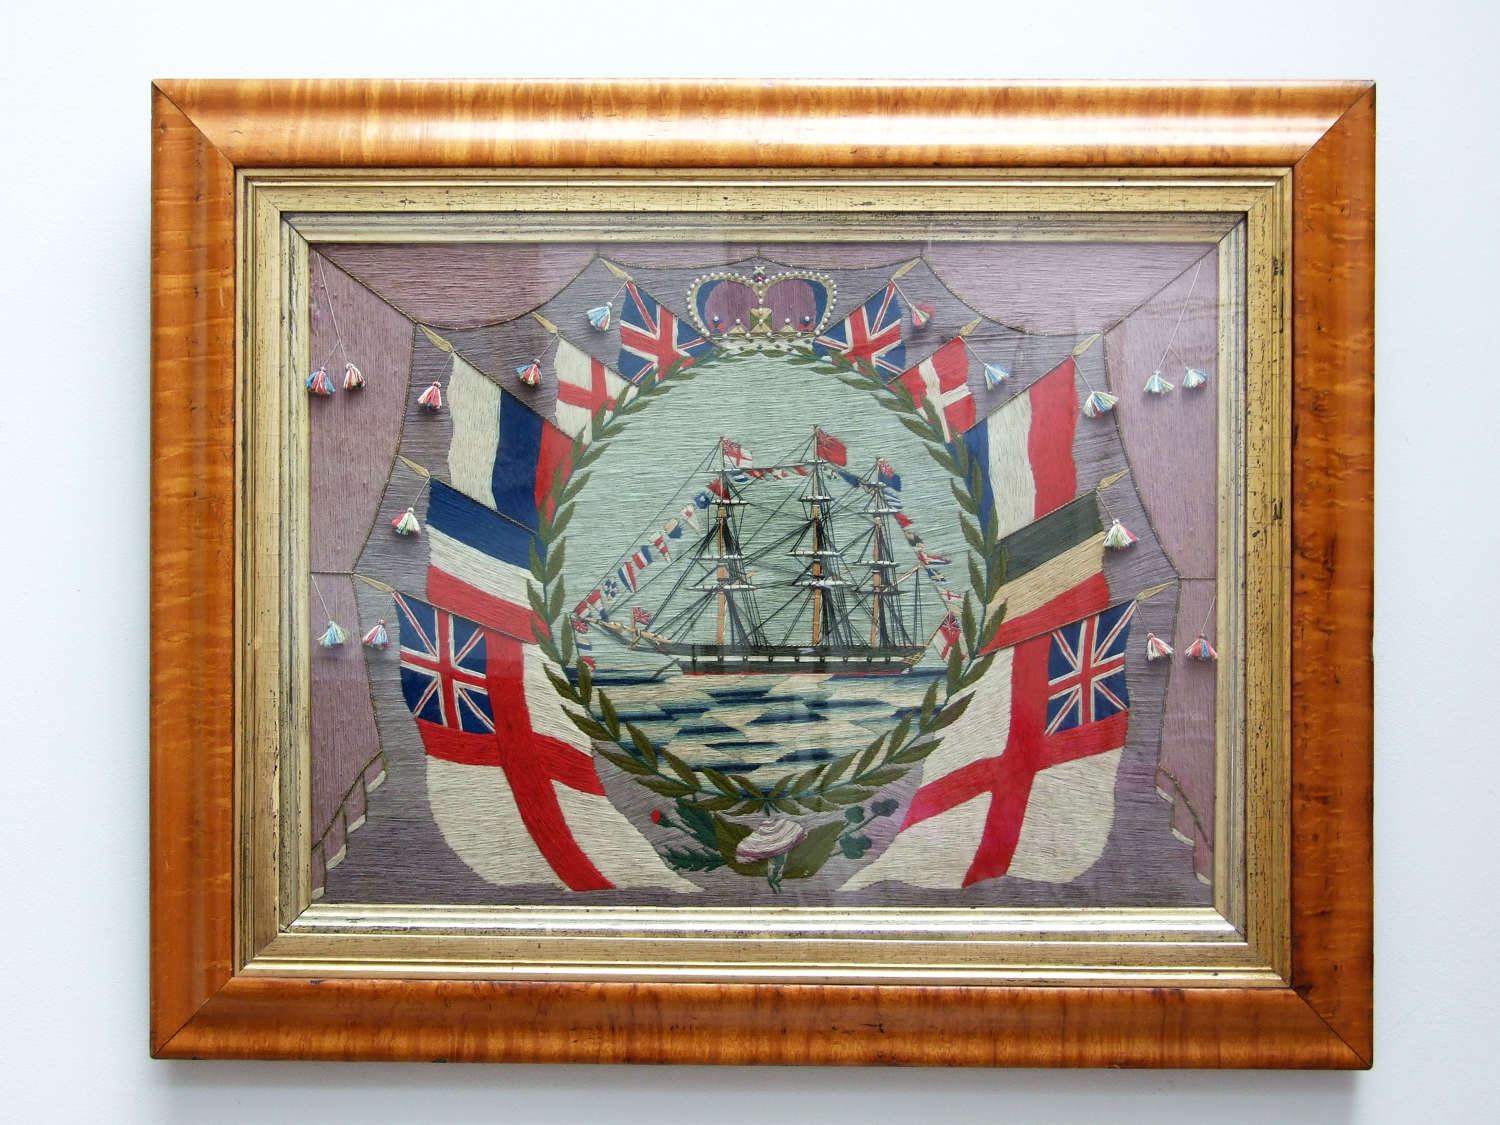 Exceptional sailor's woolwork picture in maple frame.